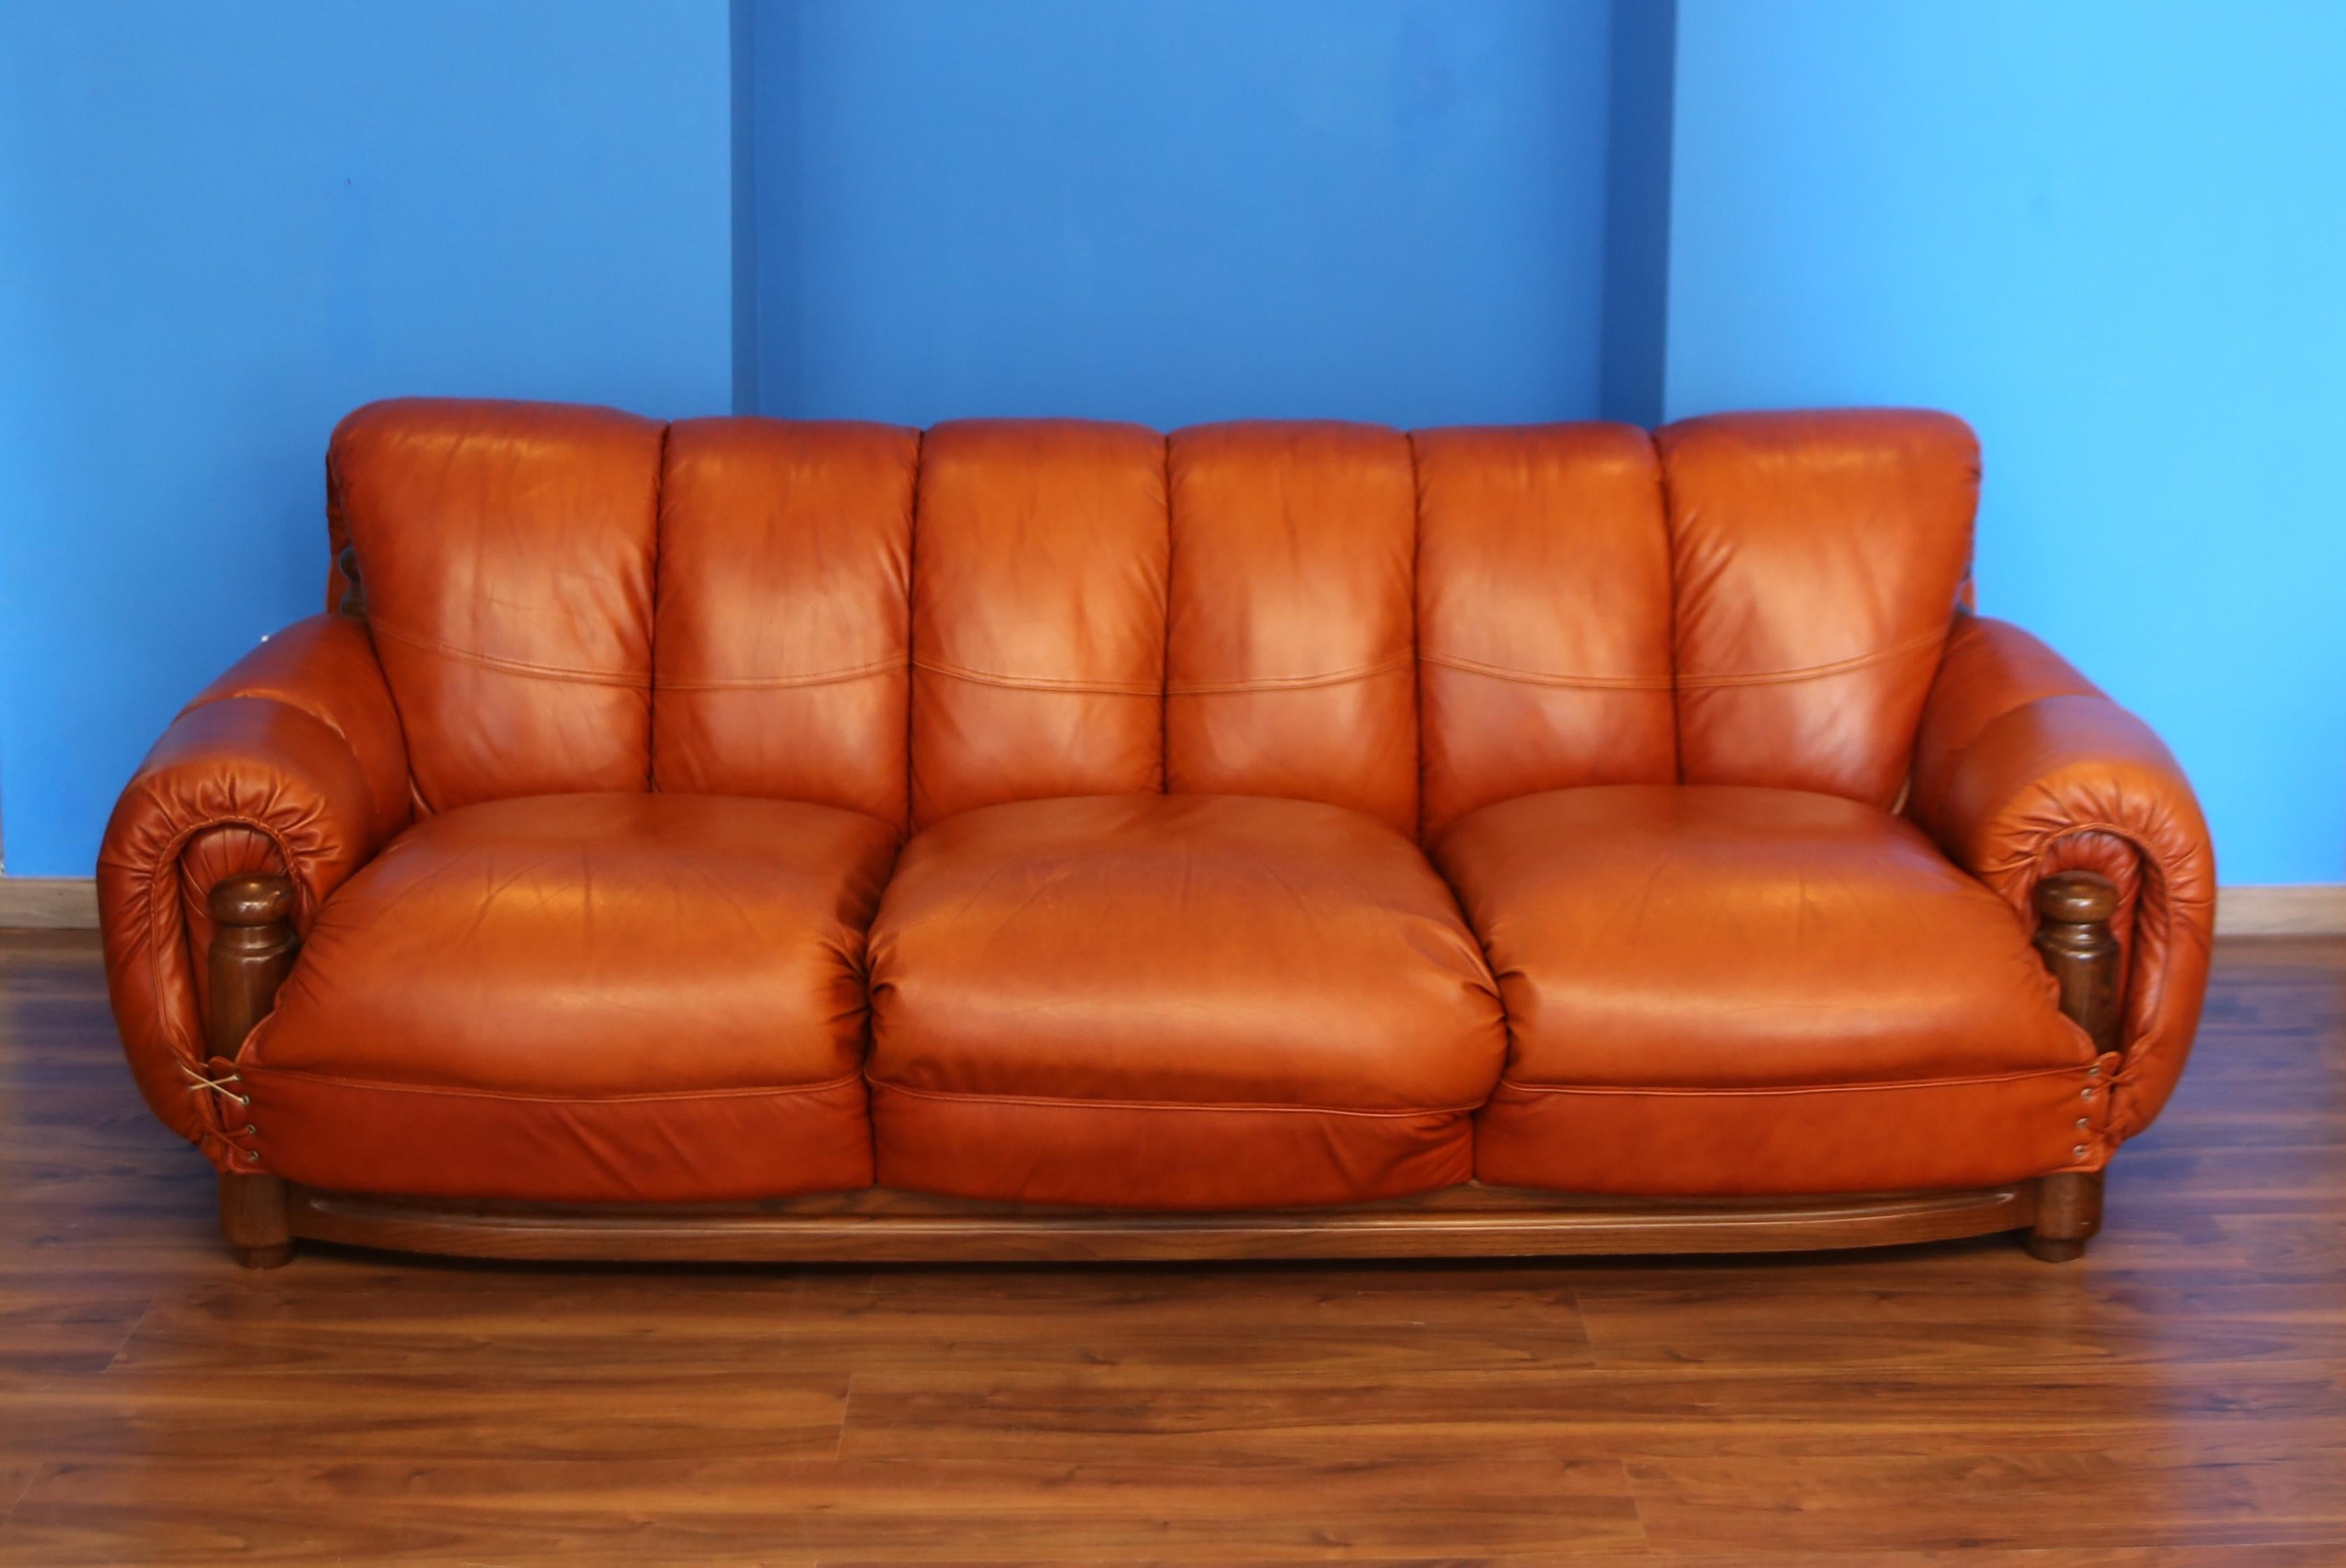 large sofa in cognac colored leather in the style of sergio rodriguez.
large cognac colored leather sofa in the style of sergio rodriguez. This sofa is in exceptional condition, the cognac colored leather has no defects. ideal for open environments.